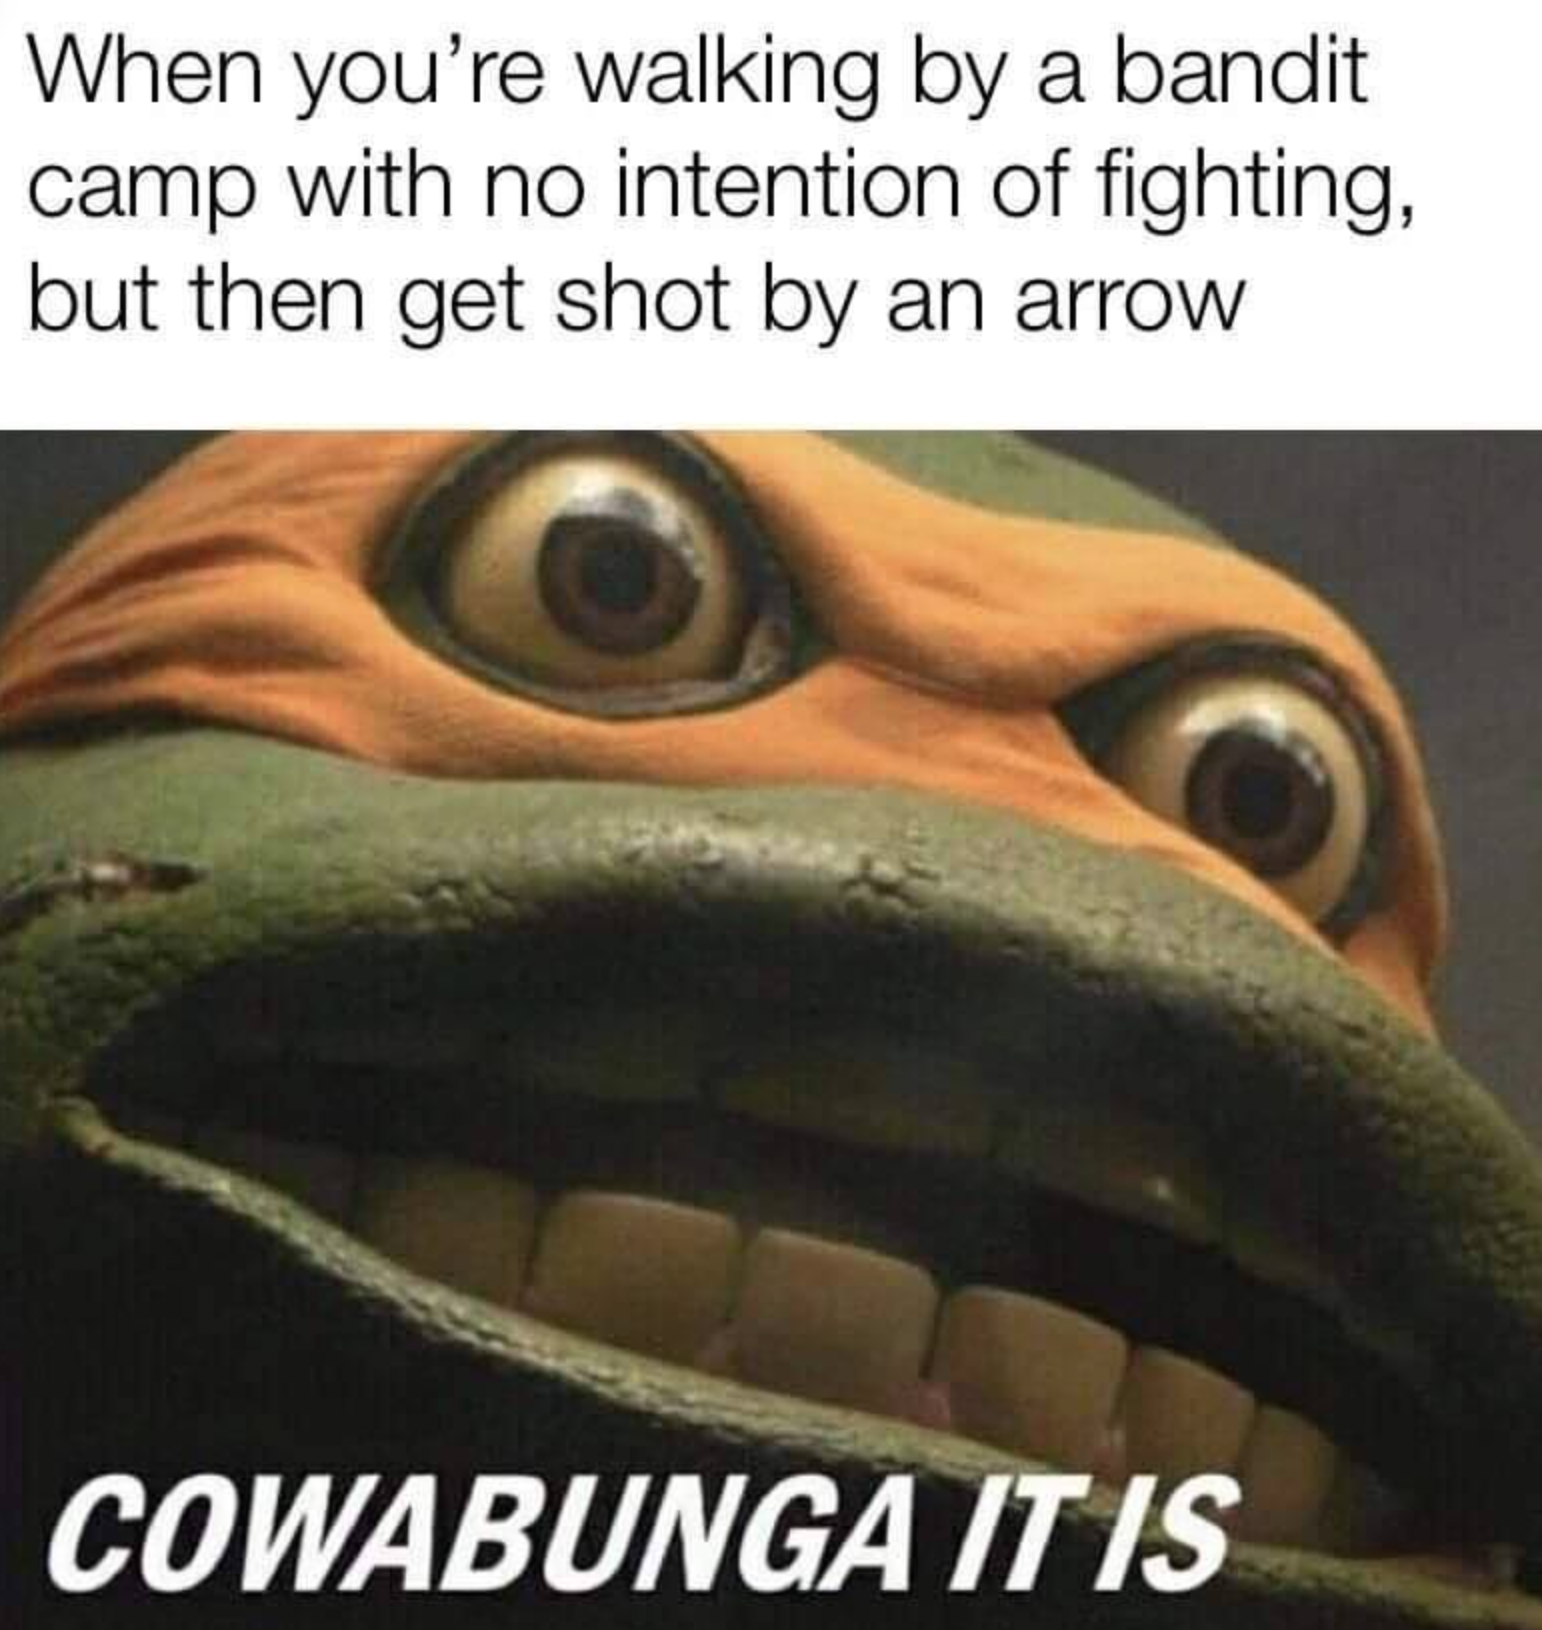 gaming memes - kowabunga meme - When you're walking by a bandit camp with no intention of fighting, but then get shot by an arrow Cowabunga It Is